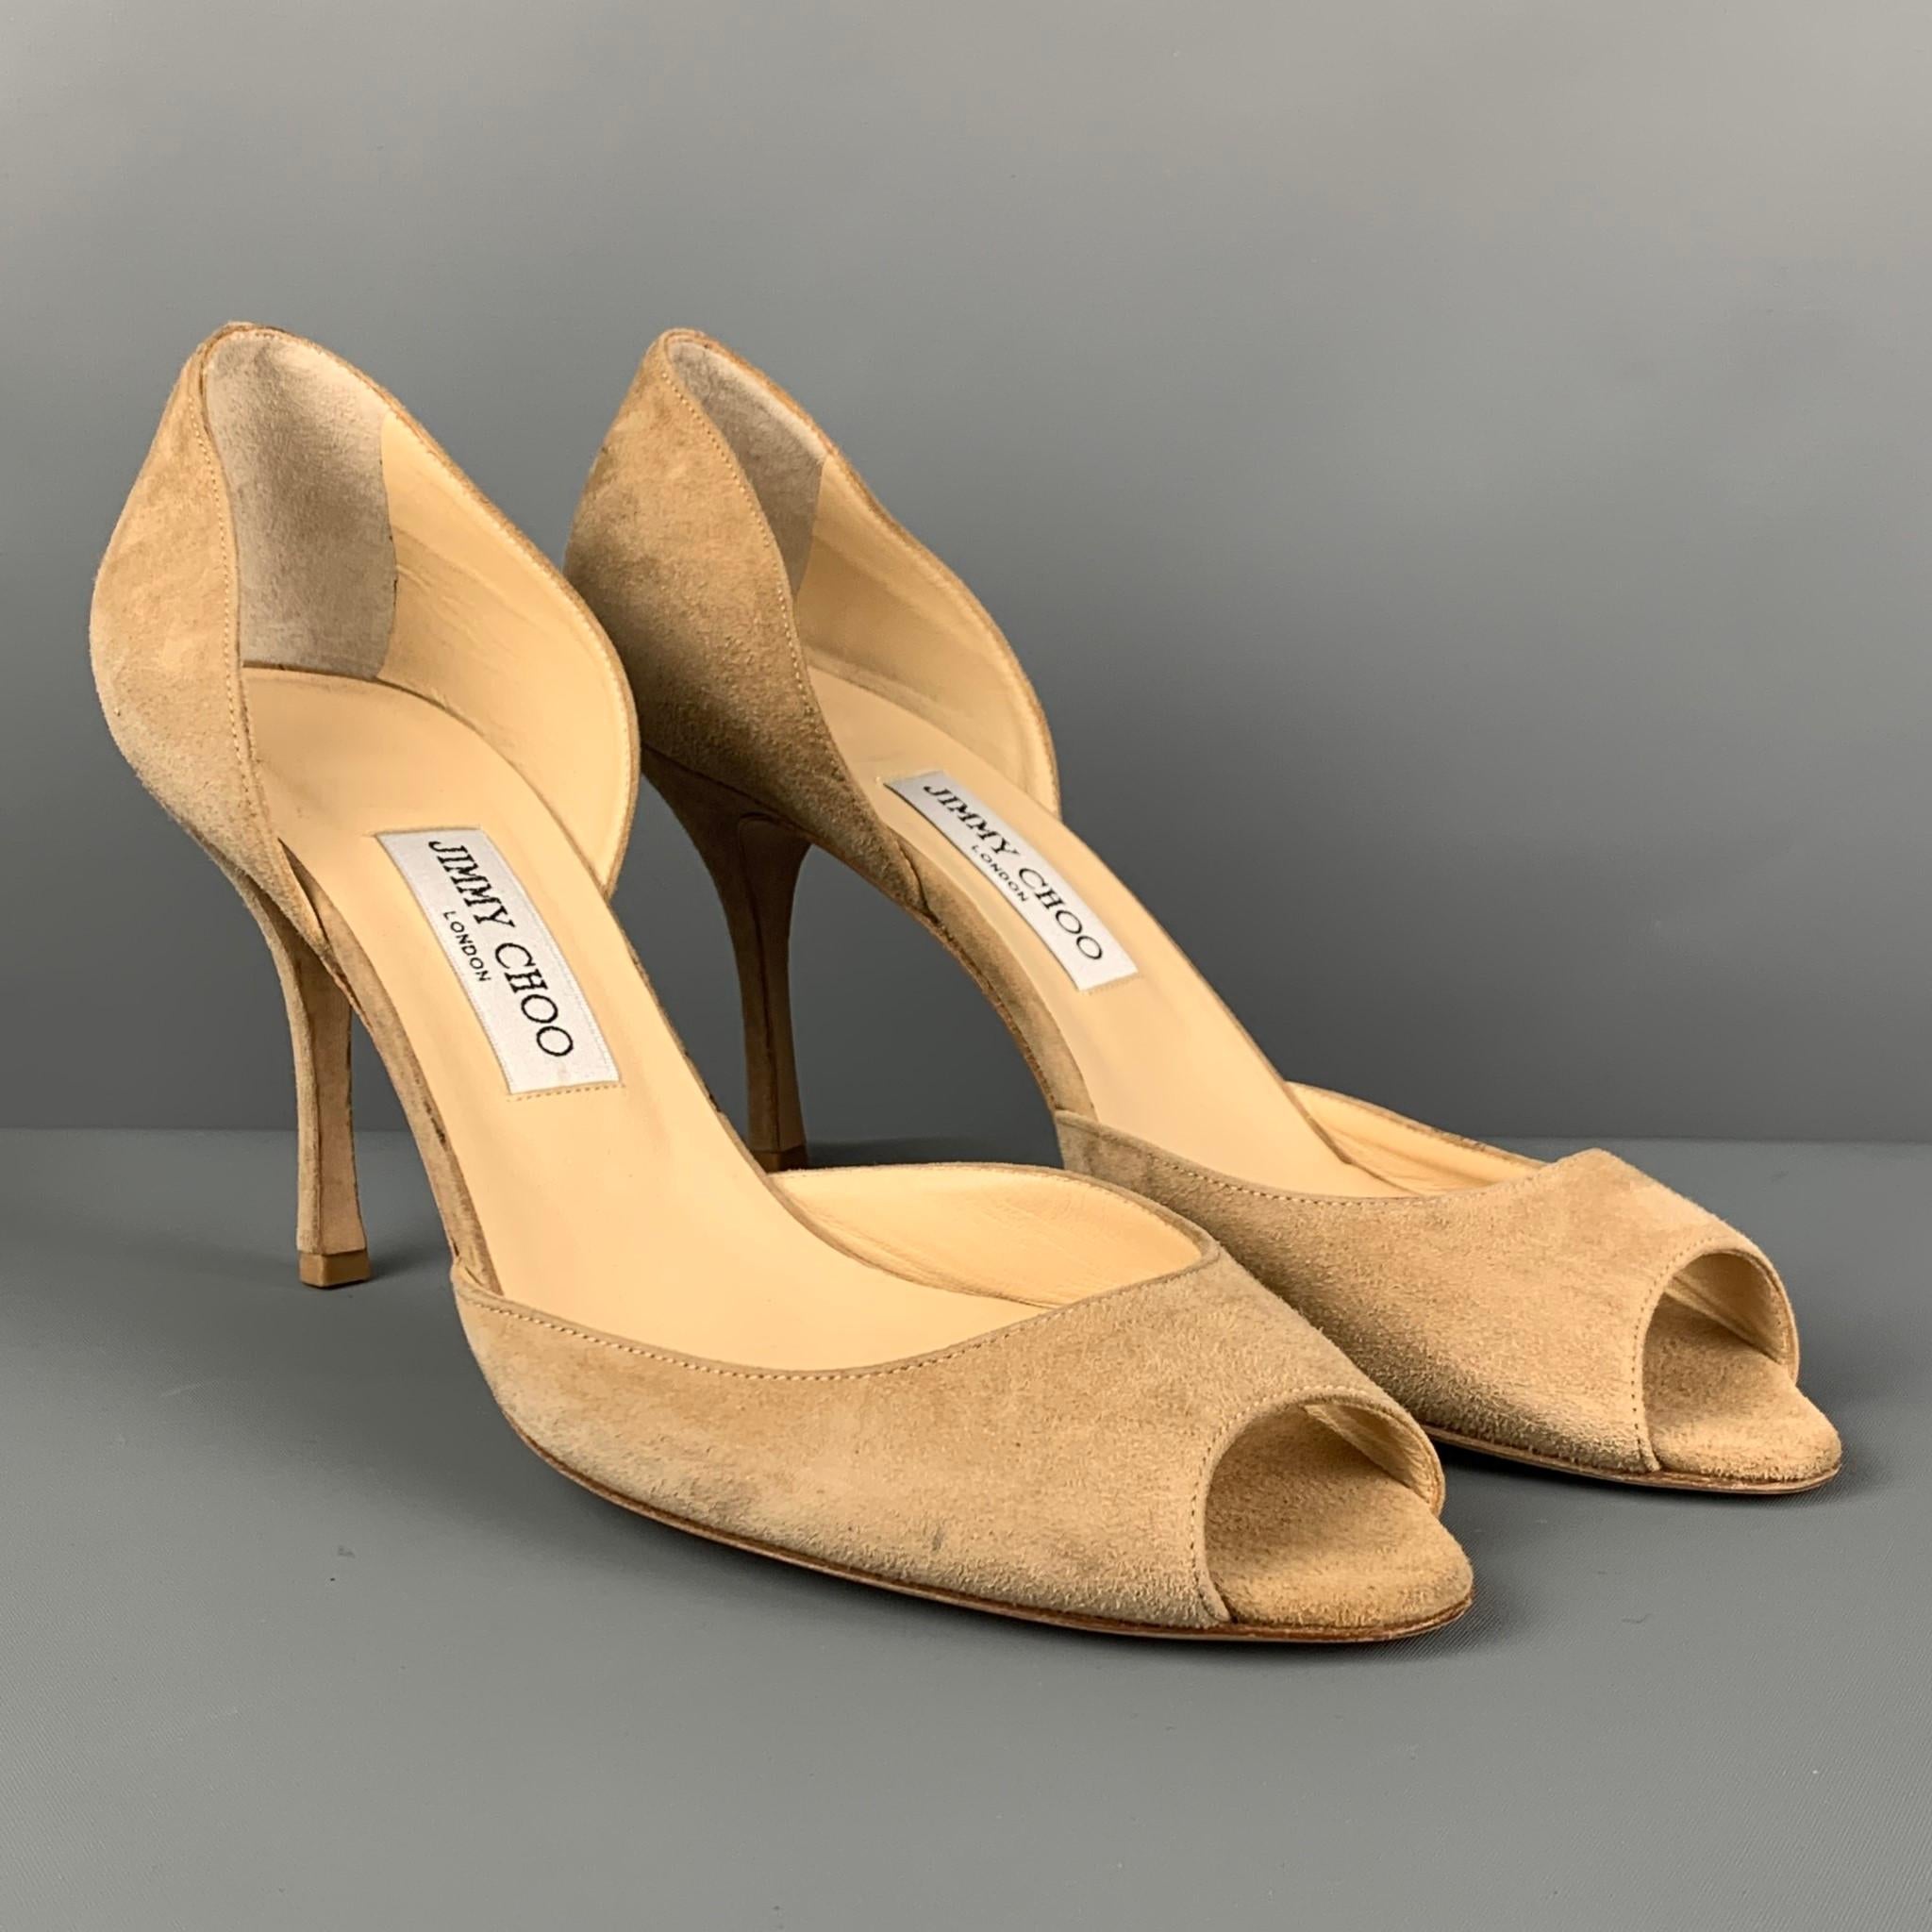 JIMMY CHOO pumps comes in a taupe suede featuring a open toe and a stacked heel. Made in Italy. 

Very Good Pre-Owned Condition.
Marked: 43

Measurements:

Heel: 4 in.
